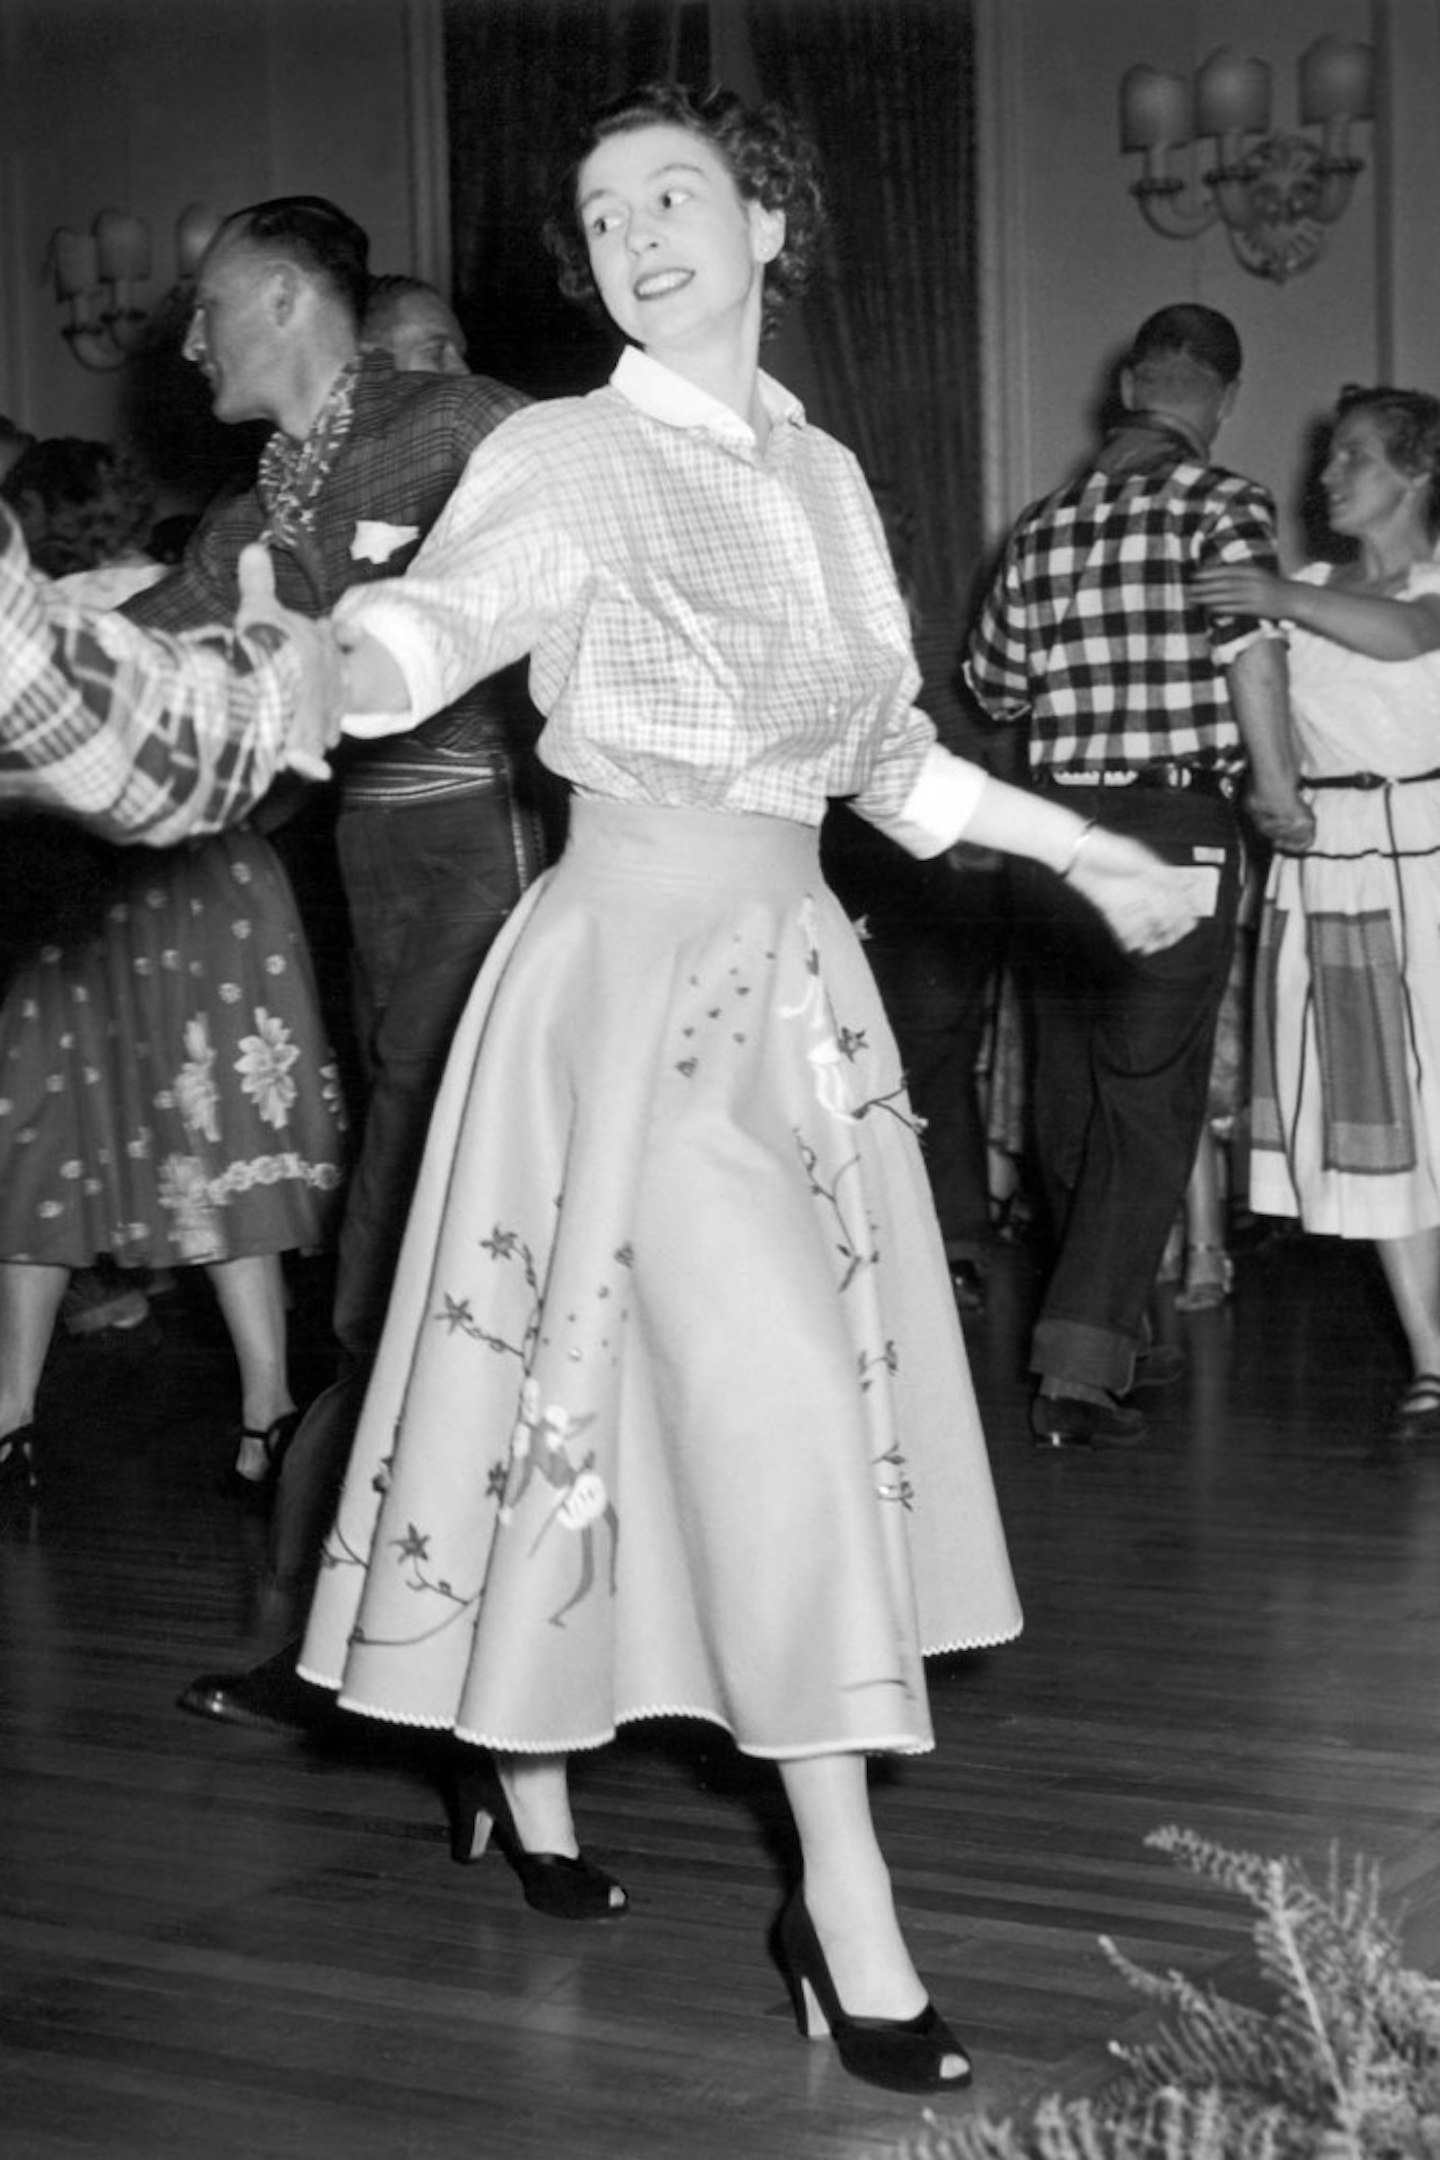 Accentuate that waist ladies, and always dress to a theme, here is me dressing for a barn dance.